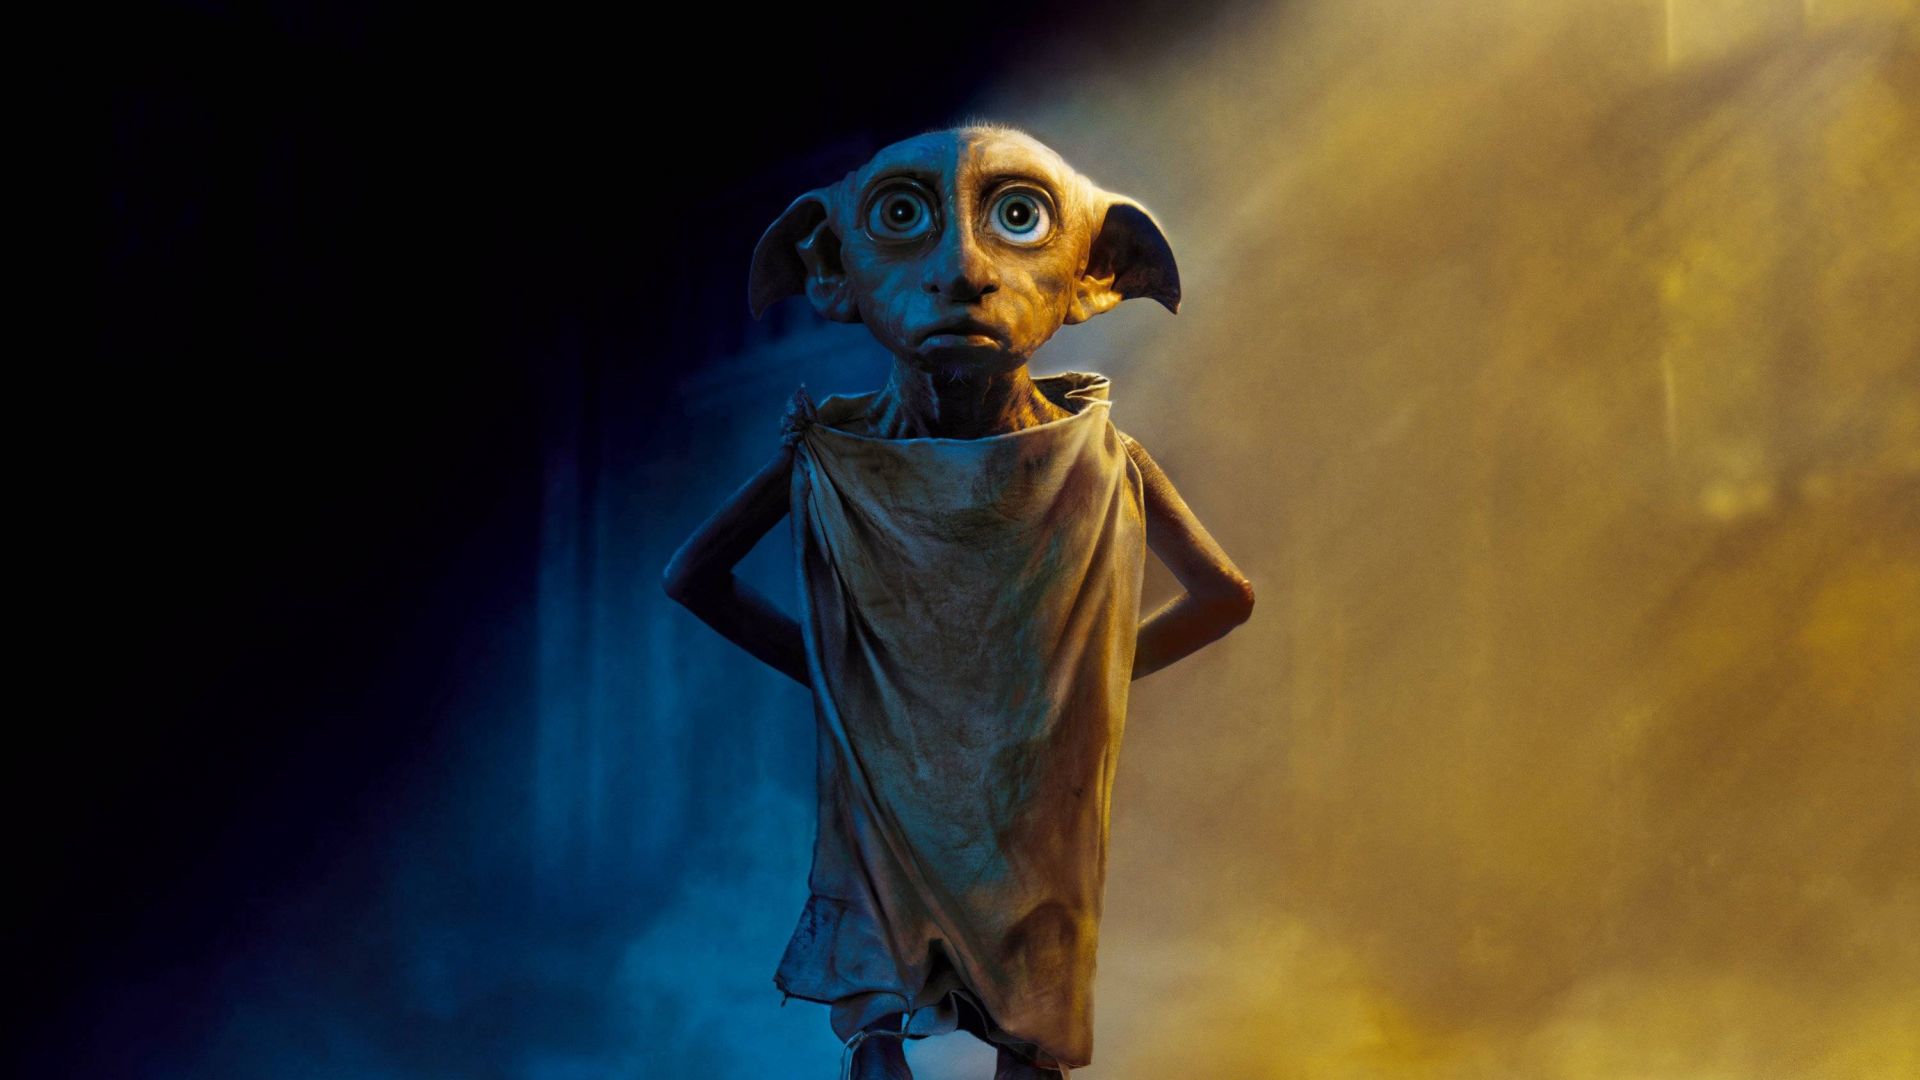 Wallpaper Dobby, the house elf, movie, harry potter, creature